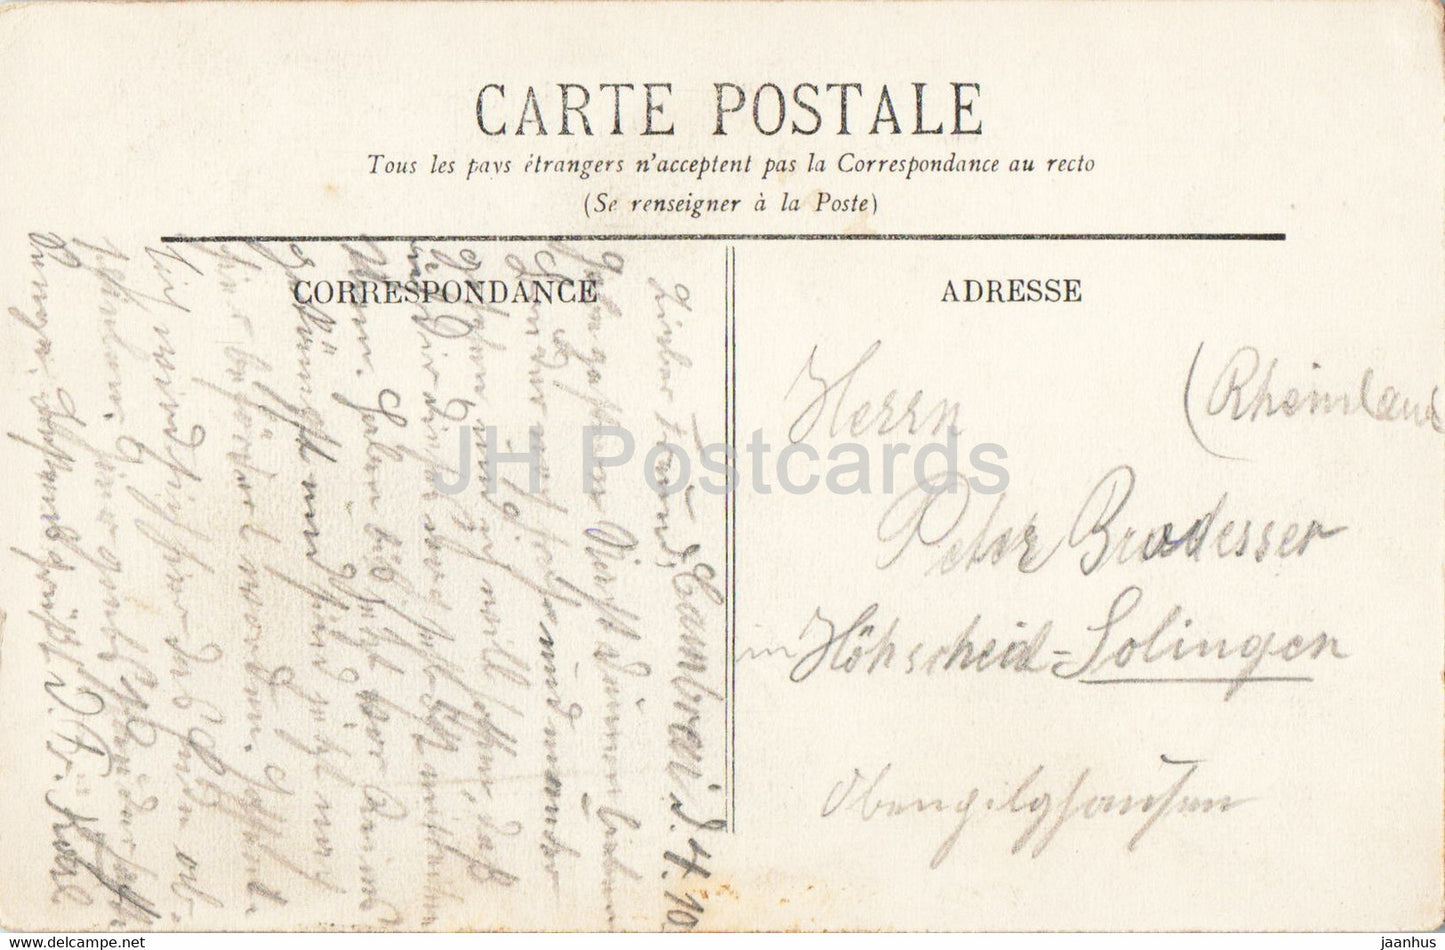 Cambrai - Batiste - monument - old postcard - 1910 - France - used